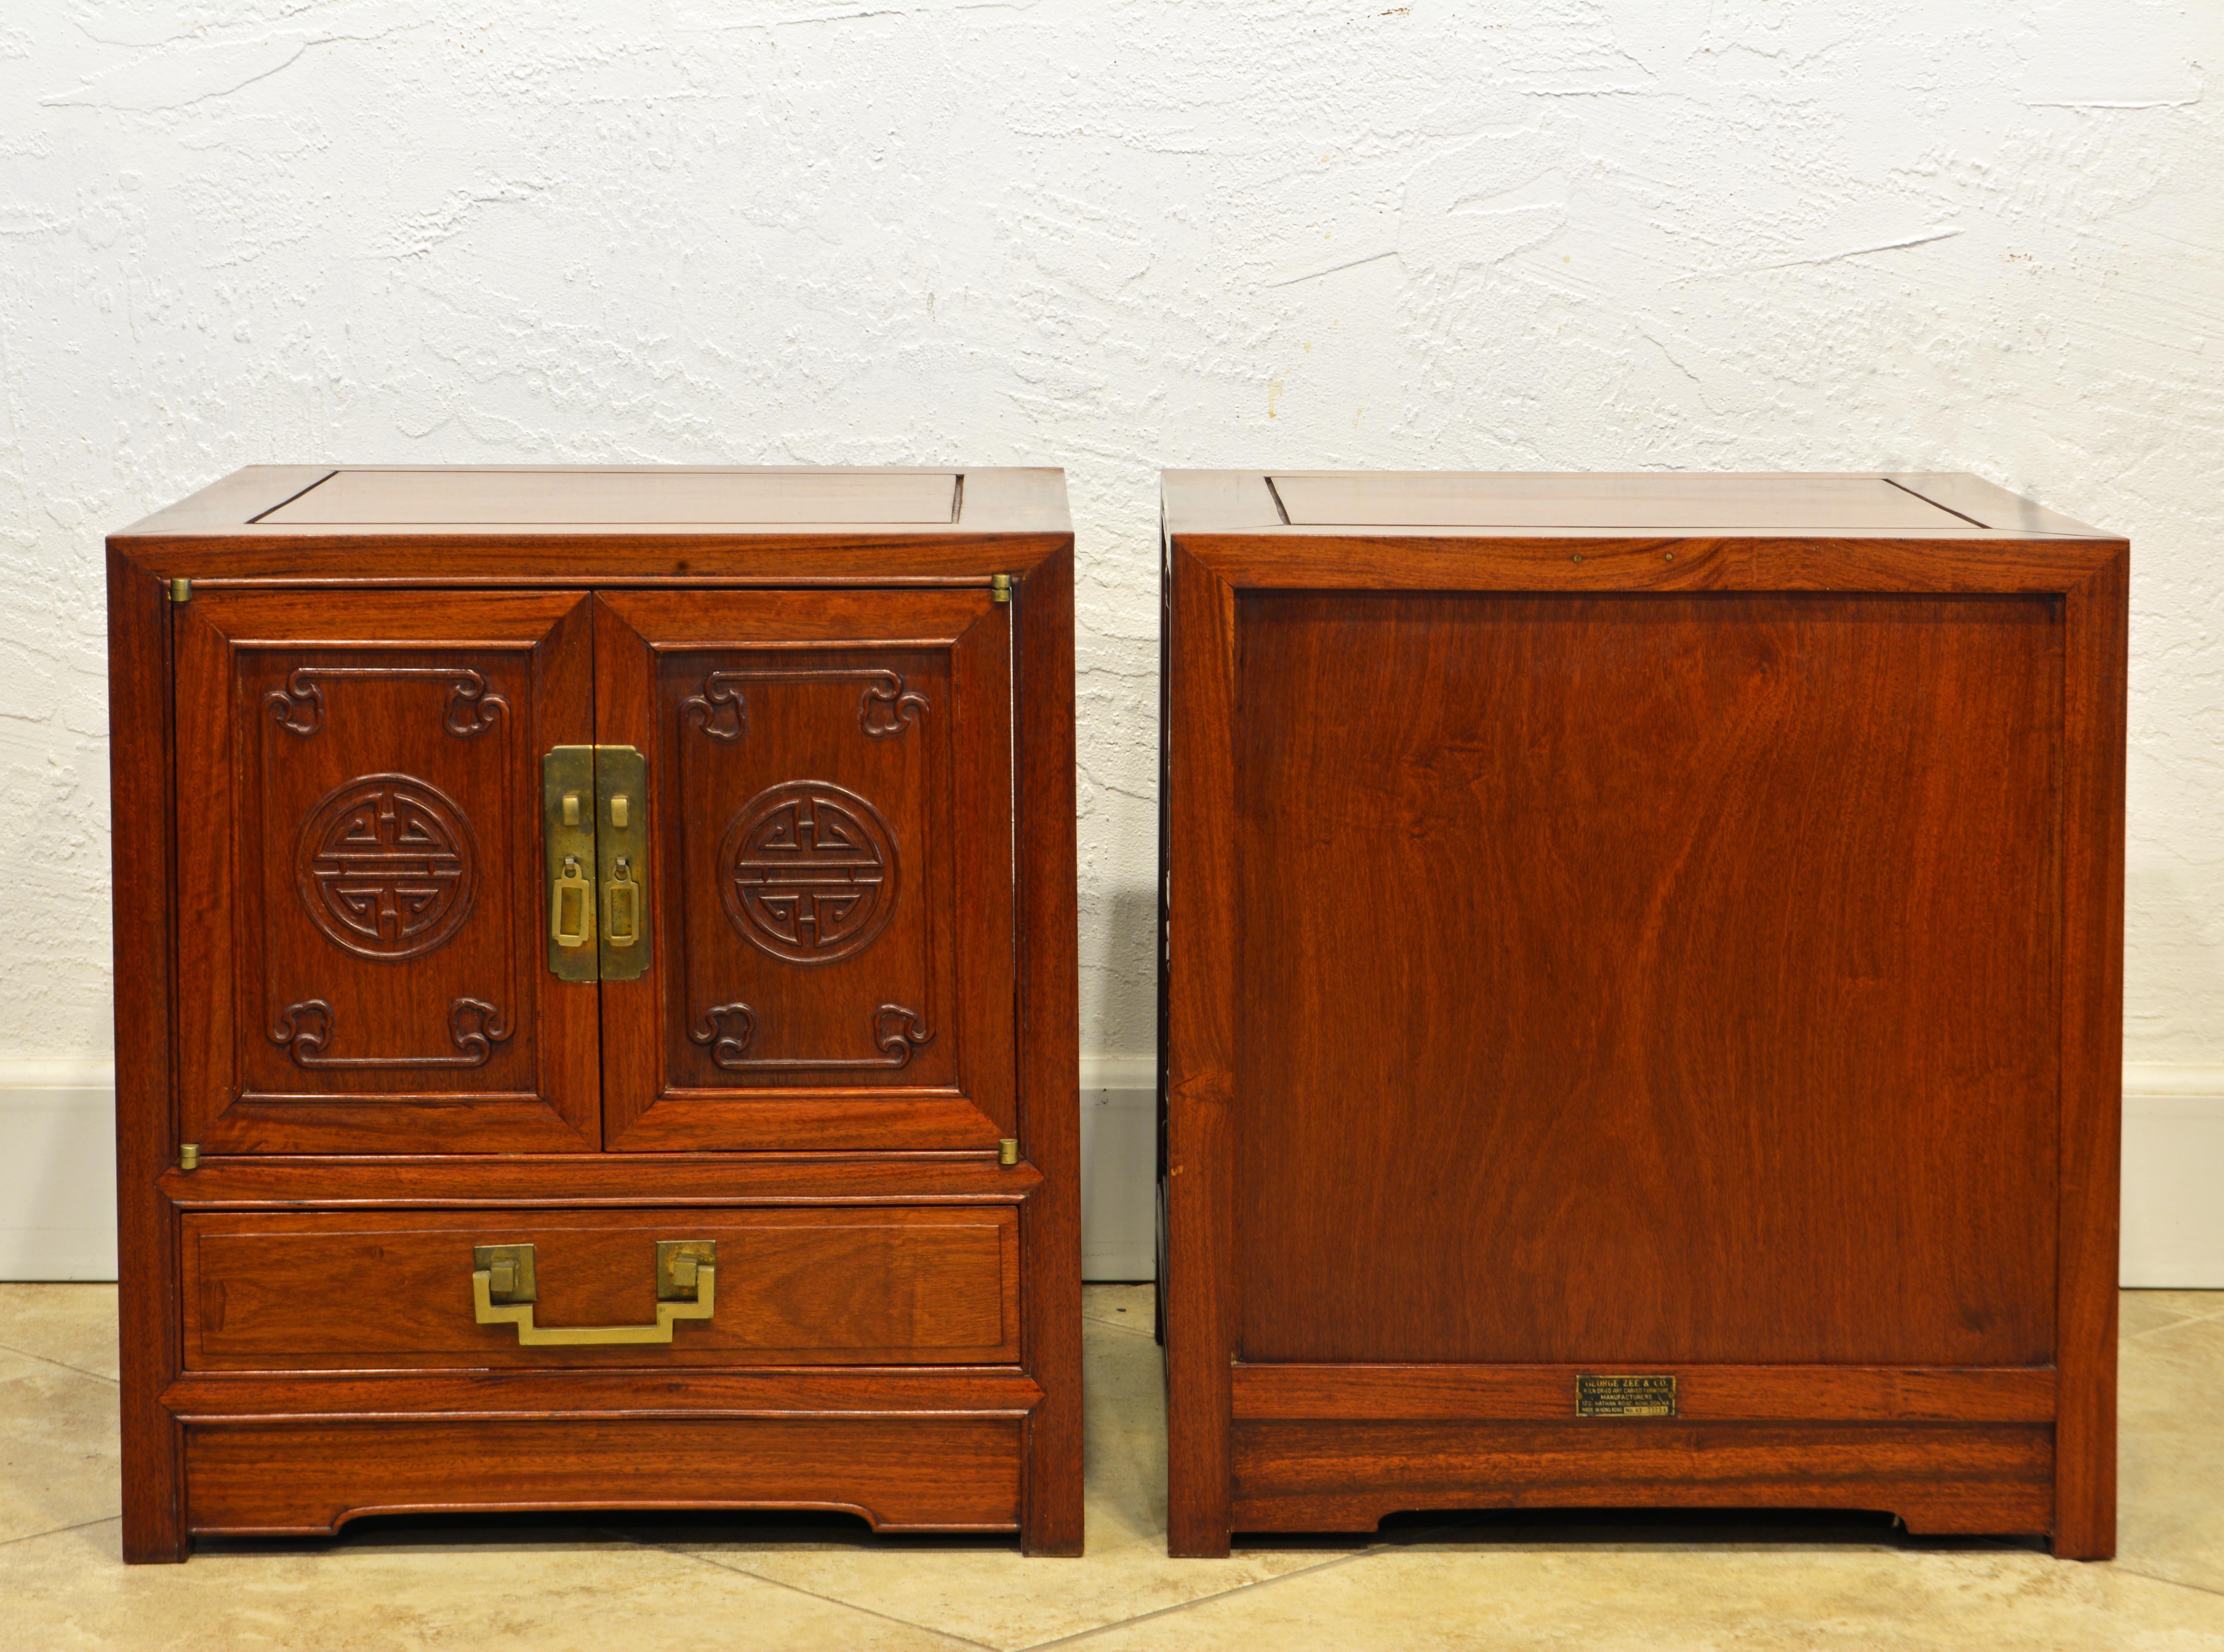 Hong Kong Pair of Midcentury Chinese Ming Style Solid Mahogany End Tables by George Zee